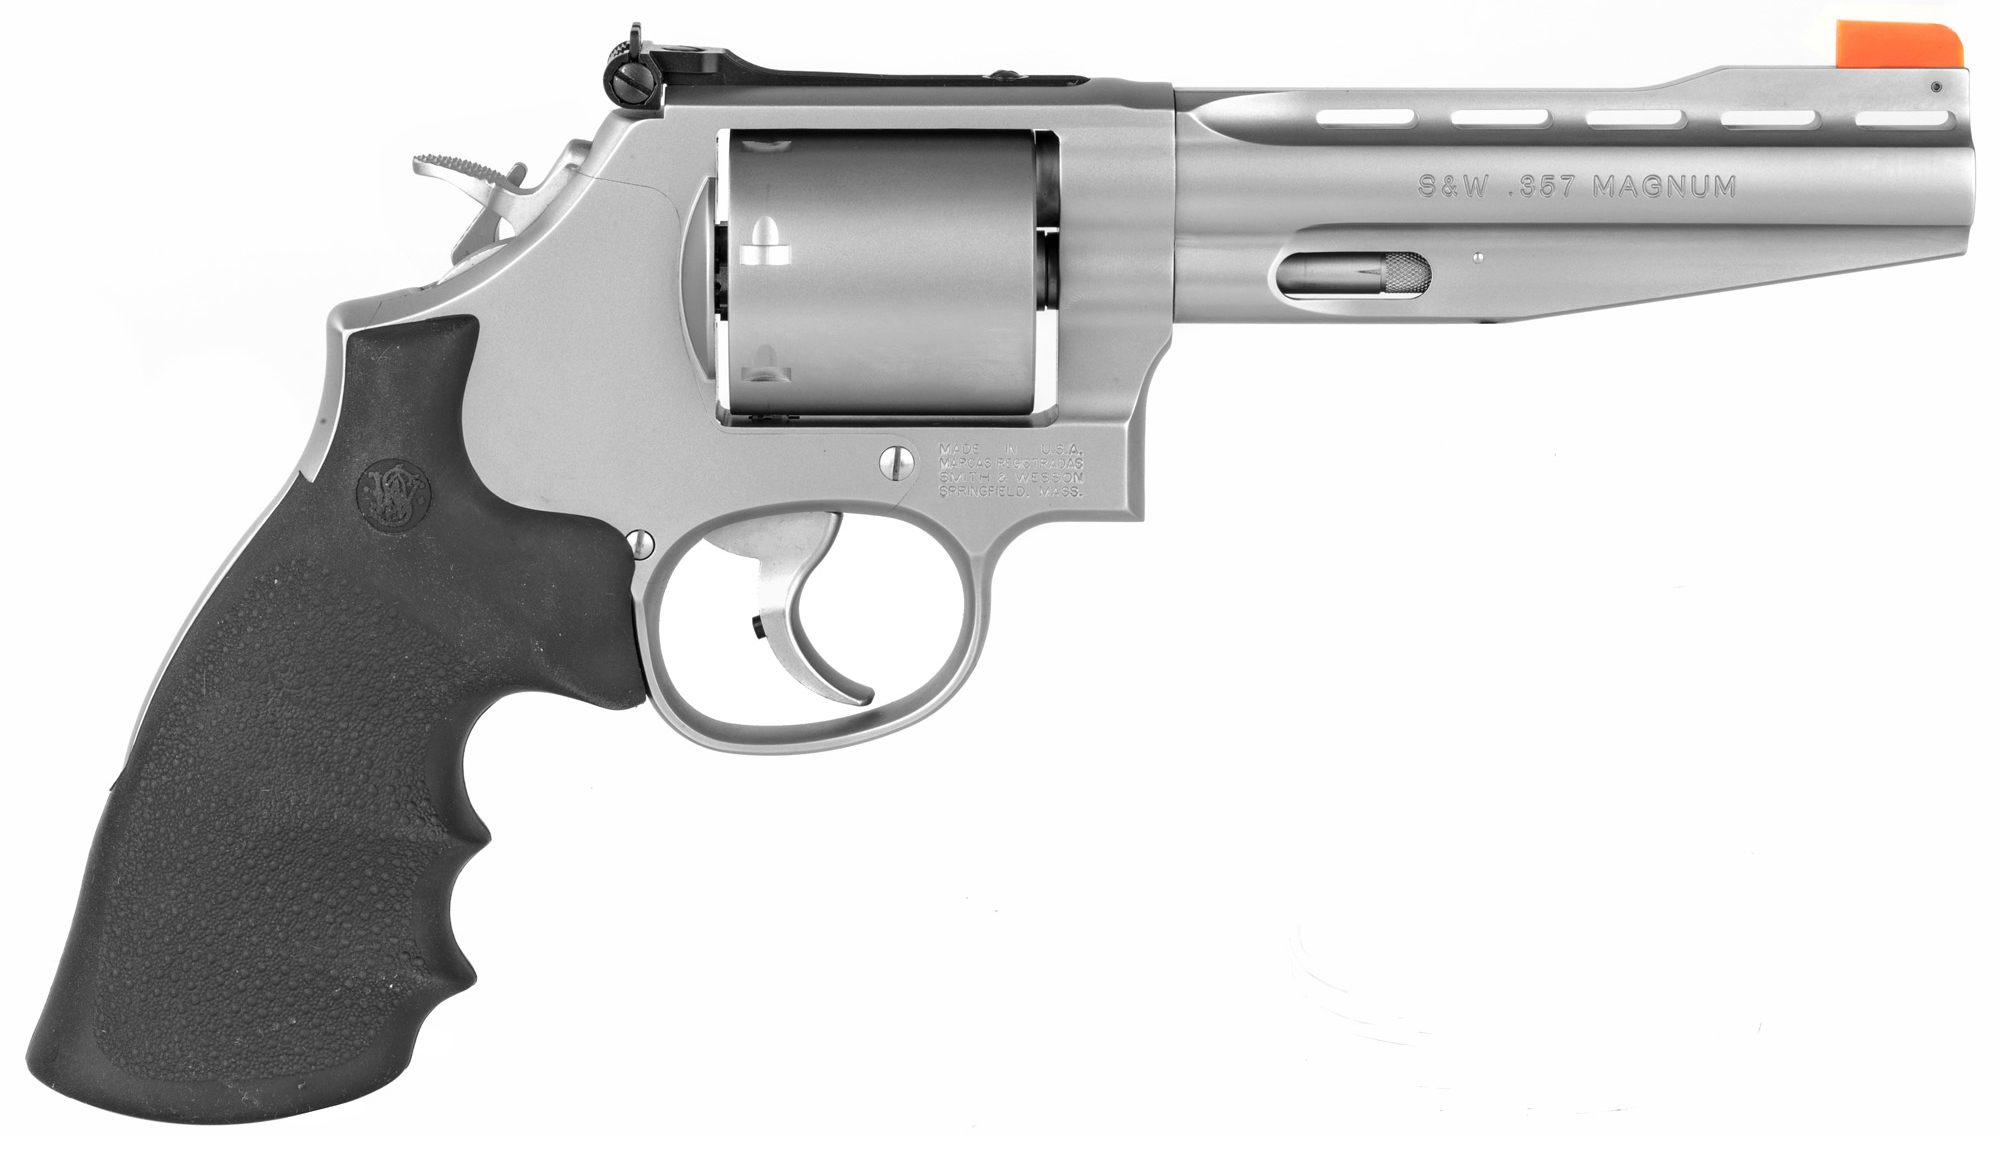 Smith & Wesson Model 642 Airweight Revolver, .38 Special, 1.88, Silver, Crimson Trace Lasergrip